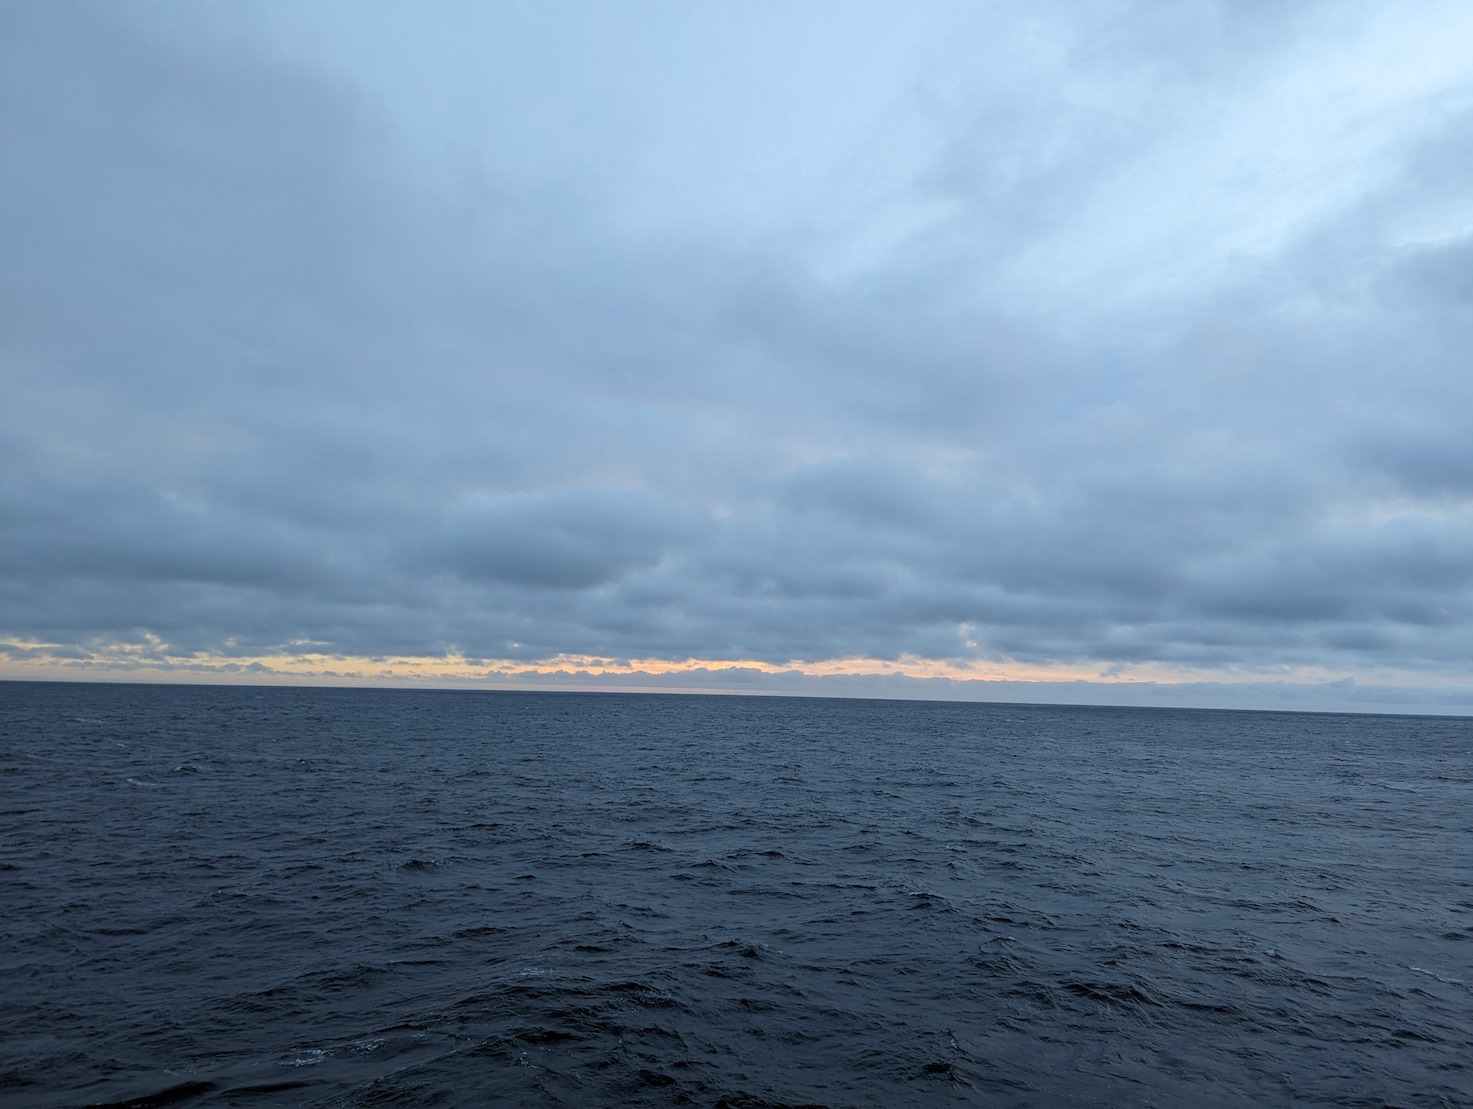 gray clouds over the ocean with the faintest hint of sunset